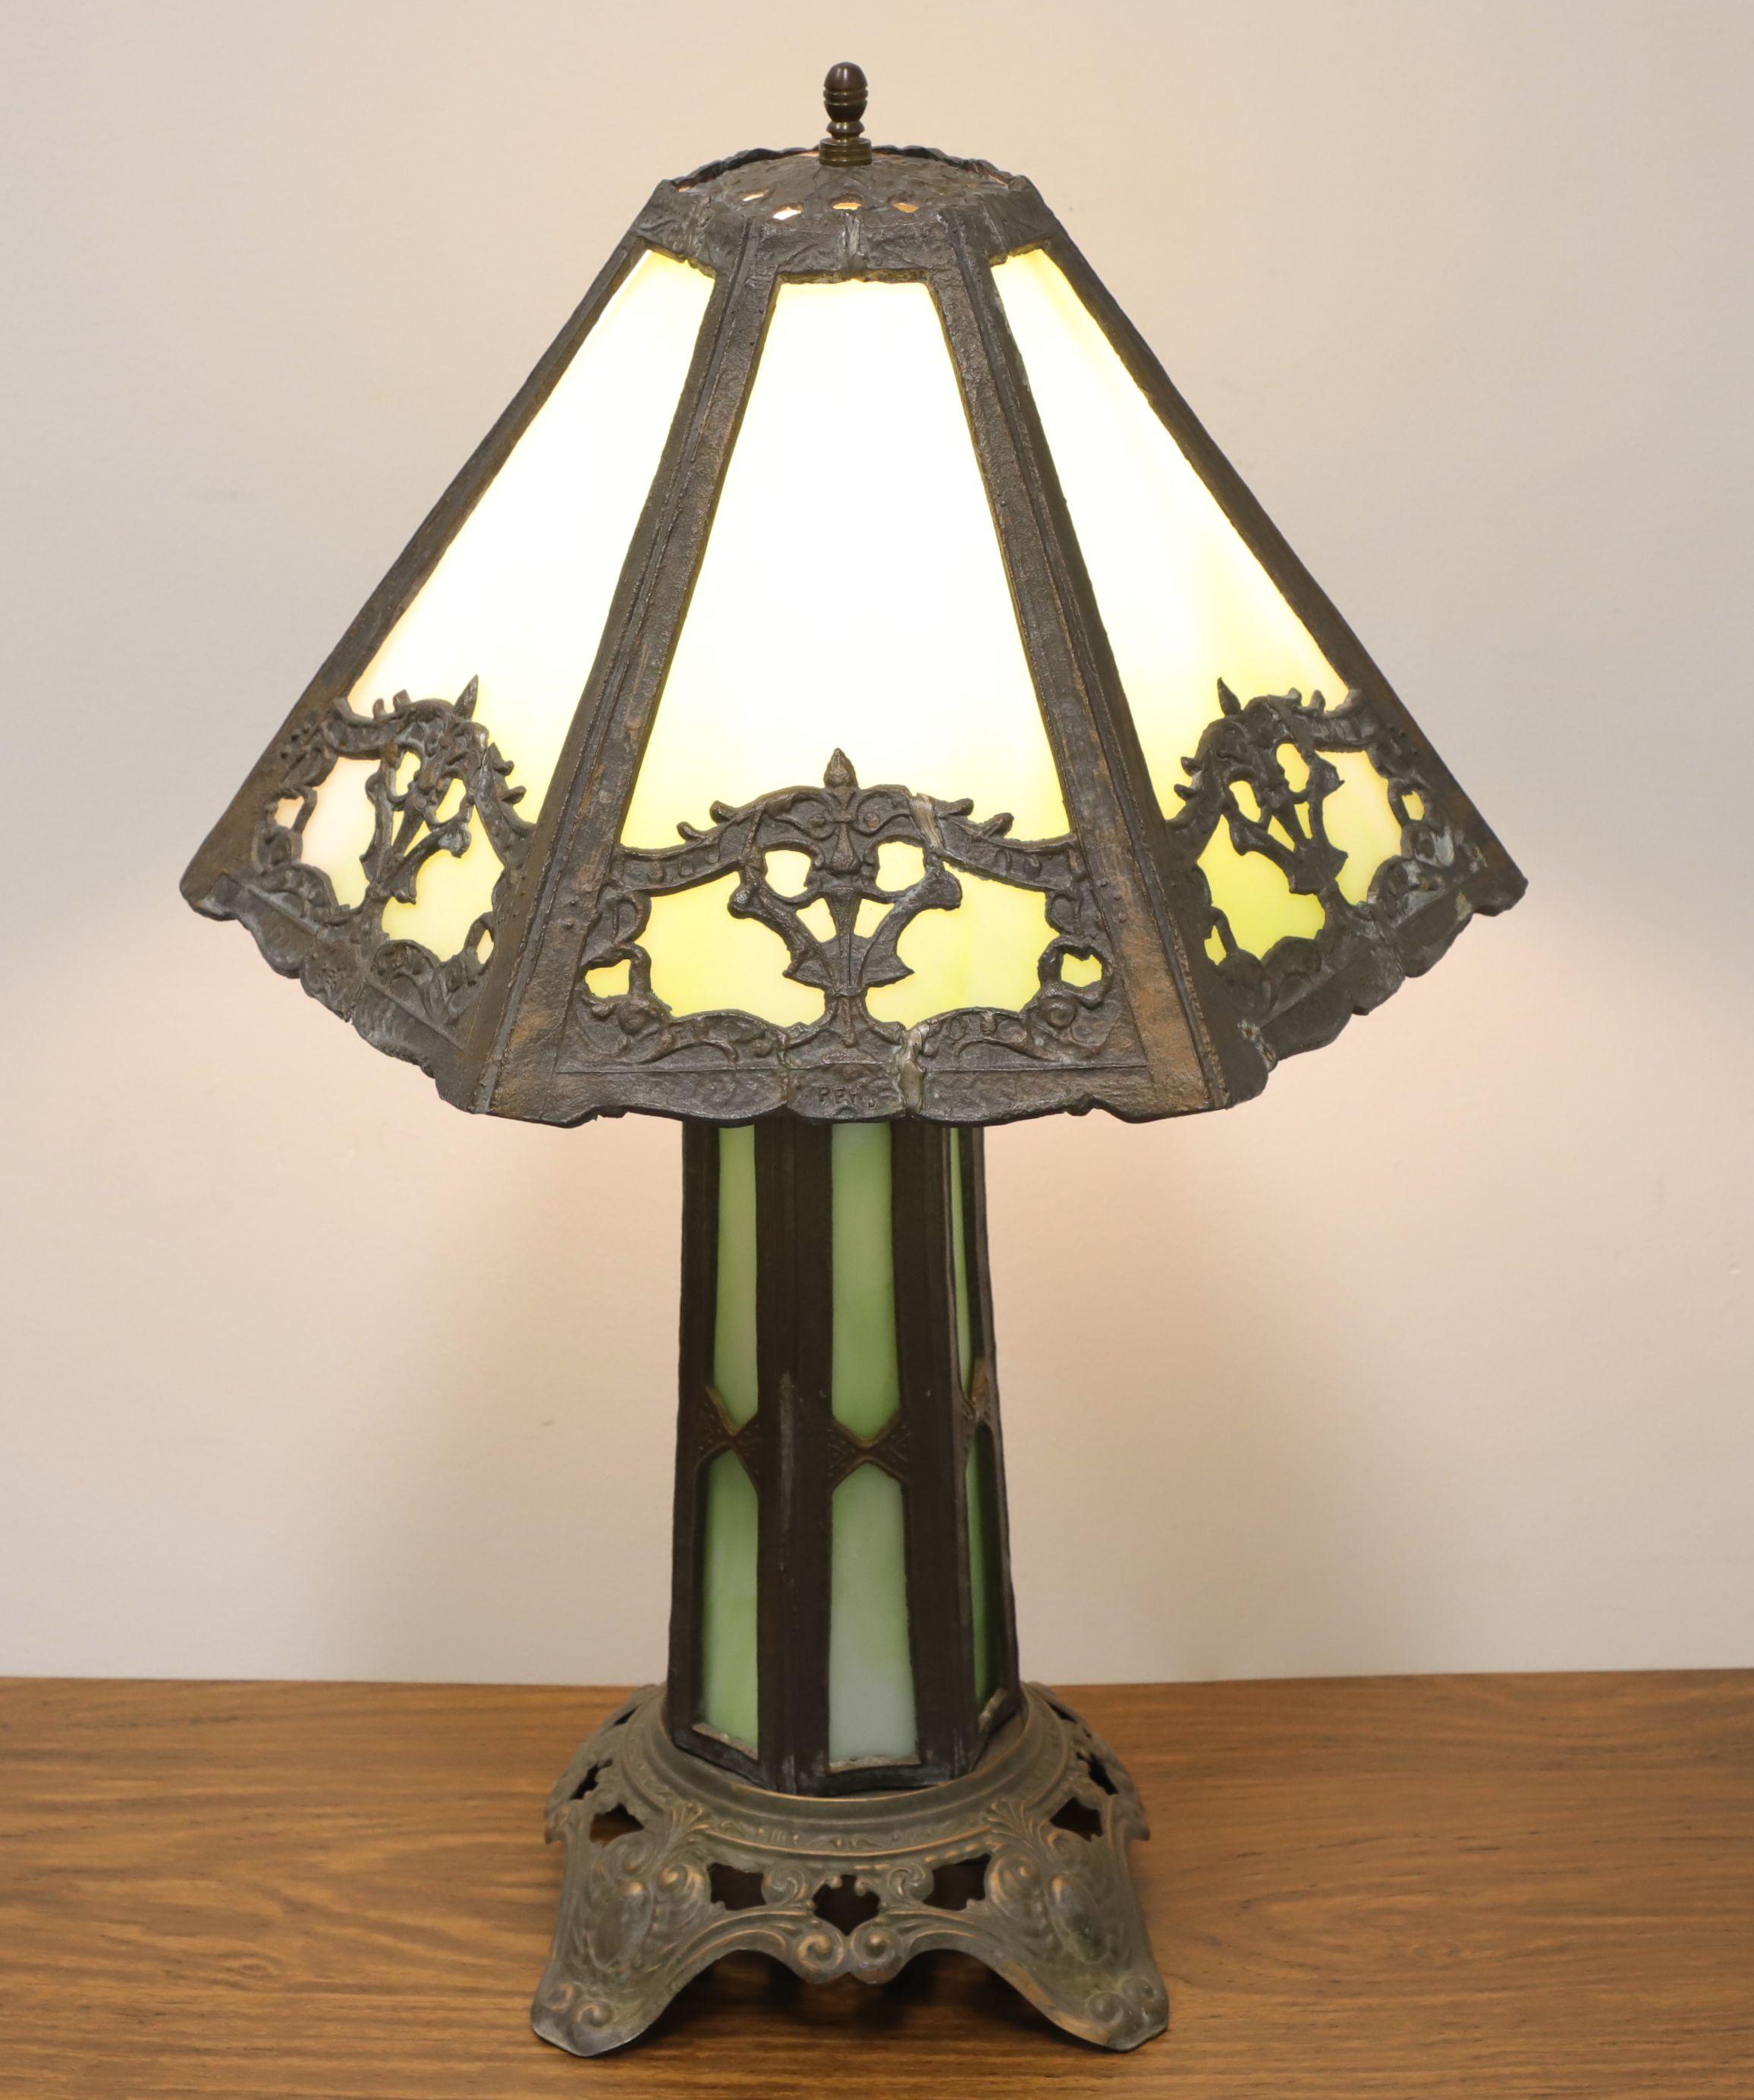 An antique Art Deco style slag glass table lamp, unbranded. Slender six-sided bronze body with green/white color slag glass inserts, decorative bronze base with four feet, and a decorative bronze hexagon shaped shade with green/white color slag